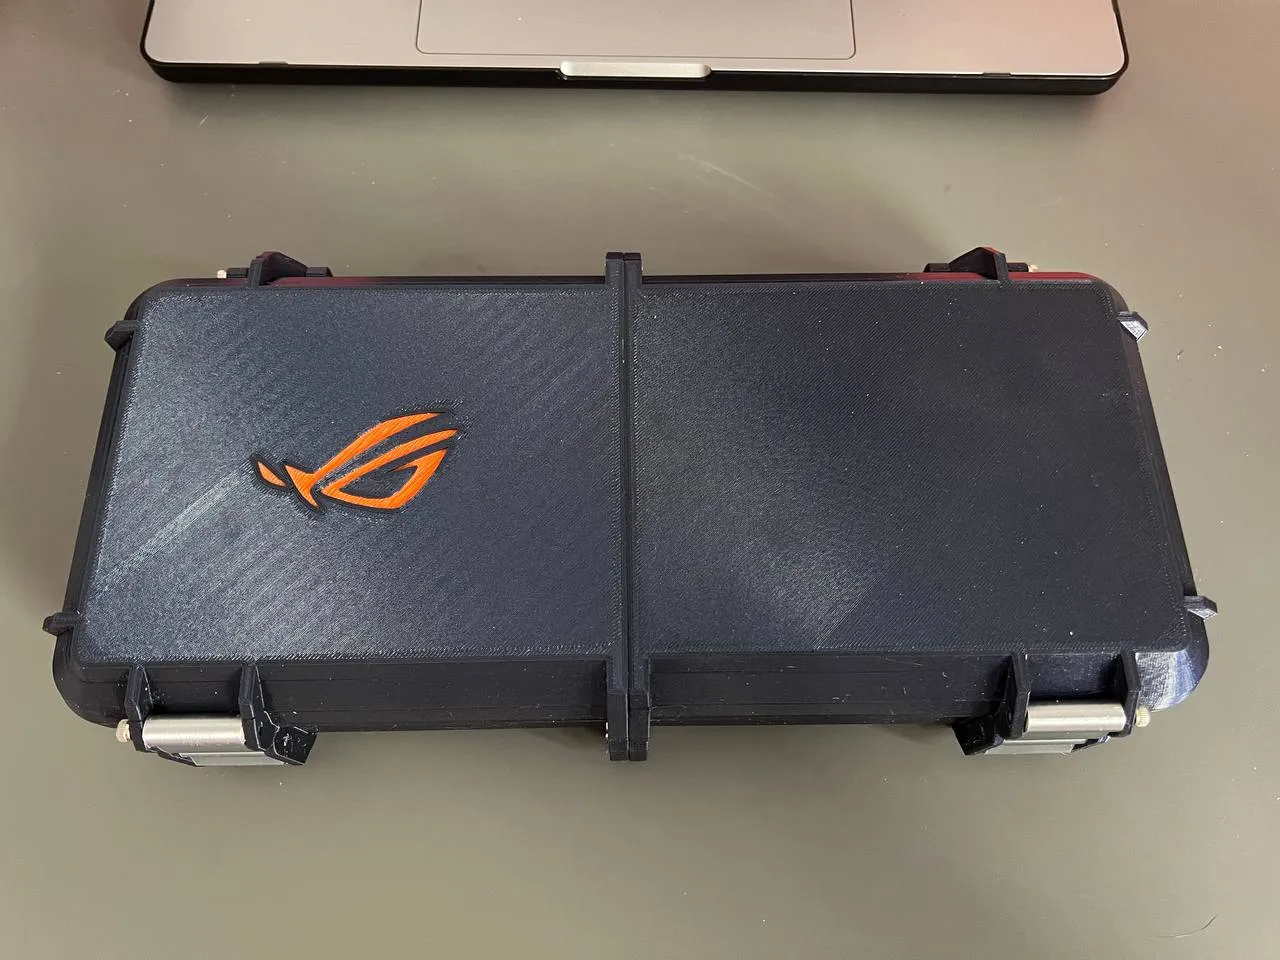 Asus ROG Ally carrying case by Pablo Simone, Download free STL model